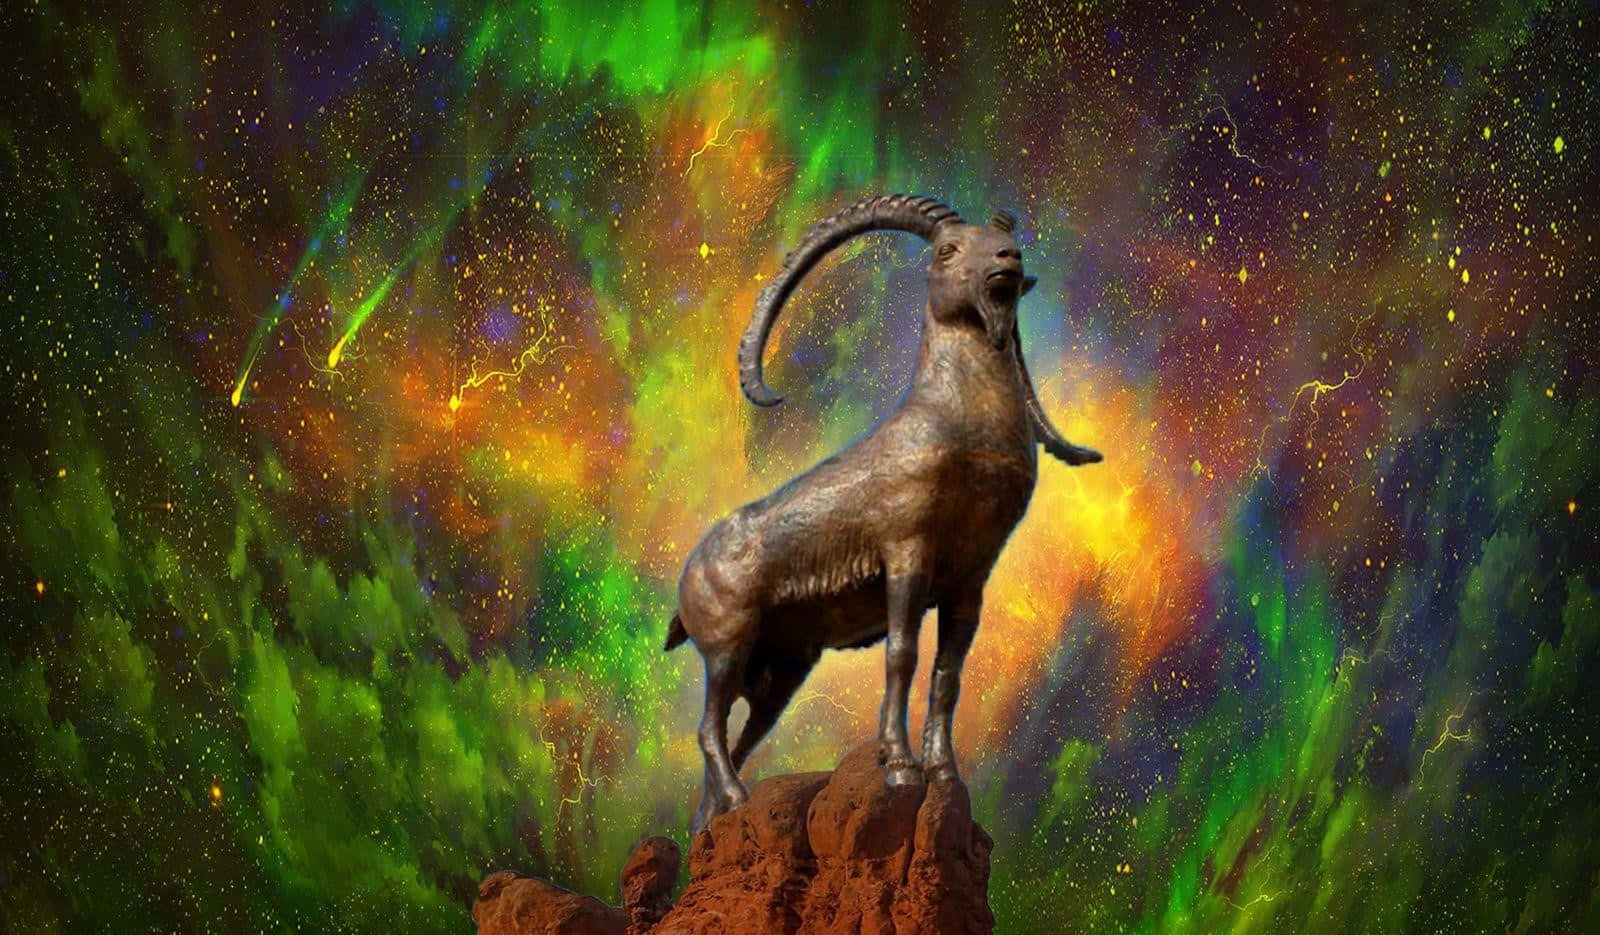 A Statue Of A Goat Standing On A Rock With A Green And Red Background